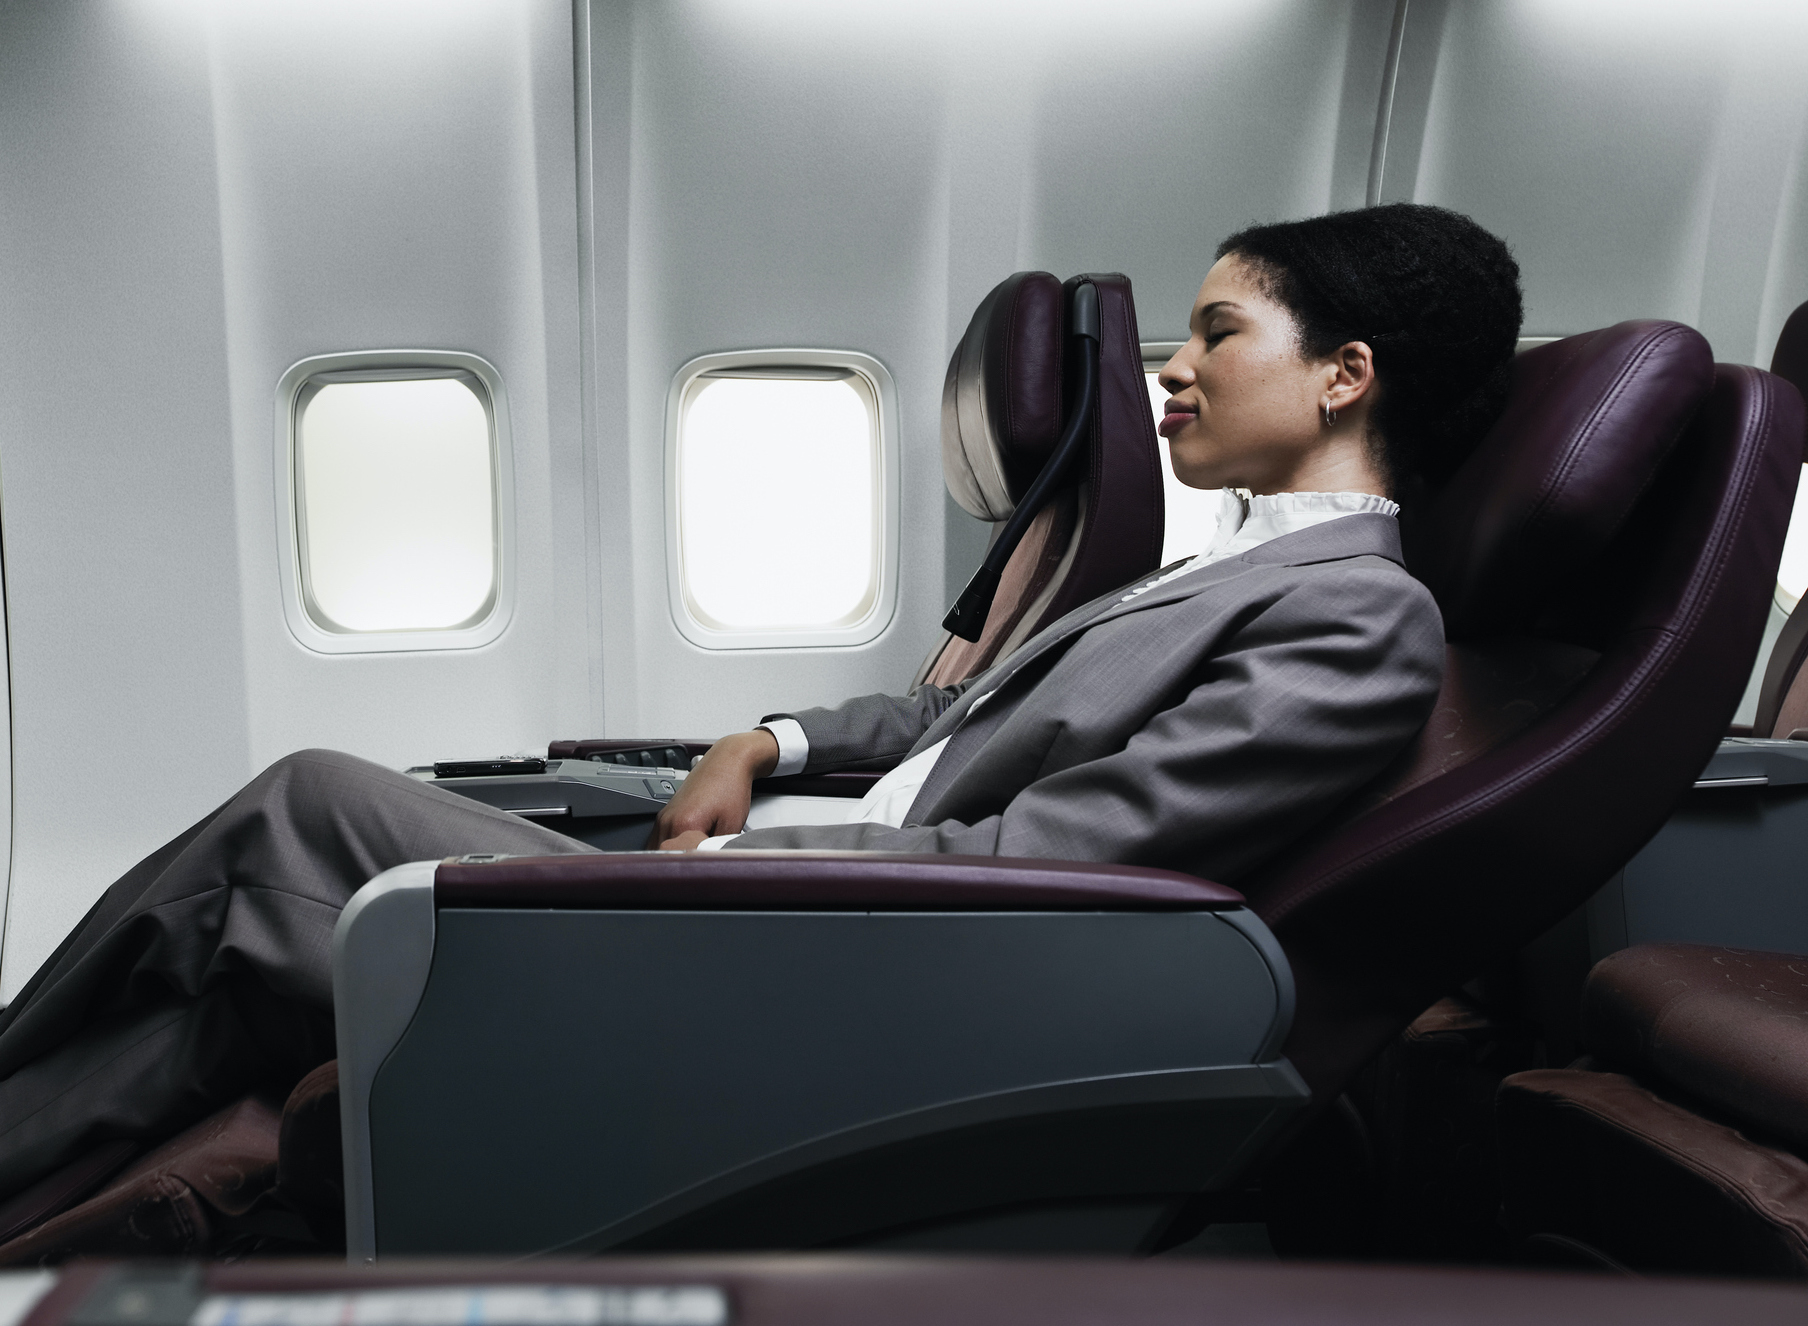 Flying Business? Here Are The 10 Best And Worst Airlines For Business Class Travel